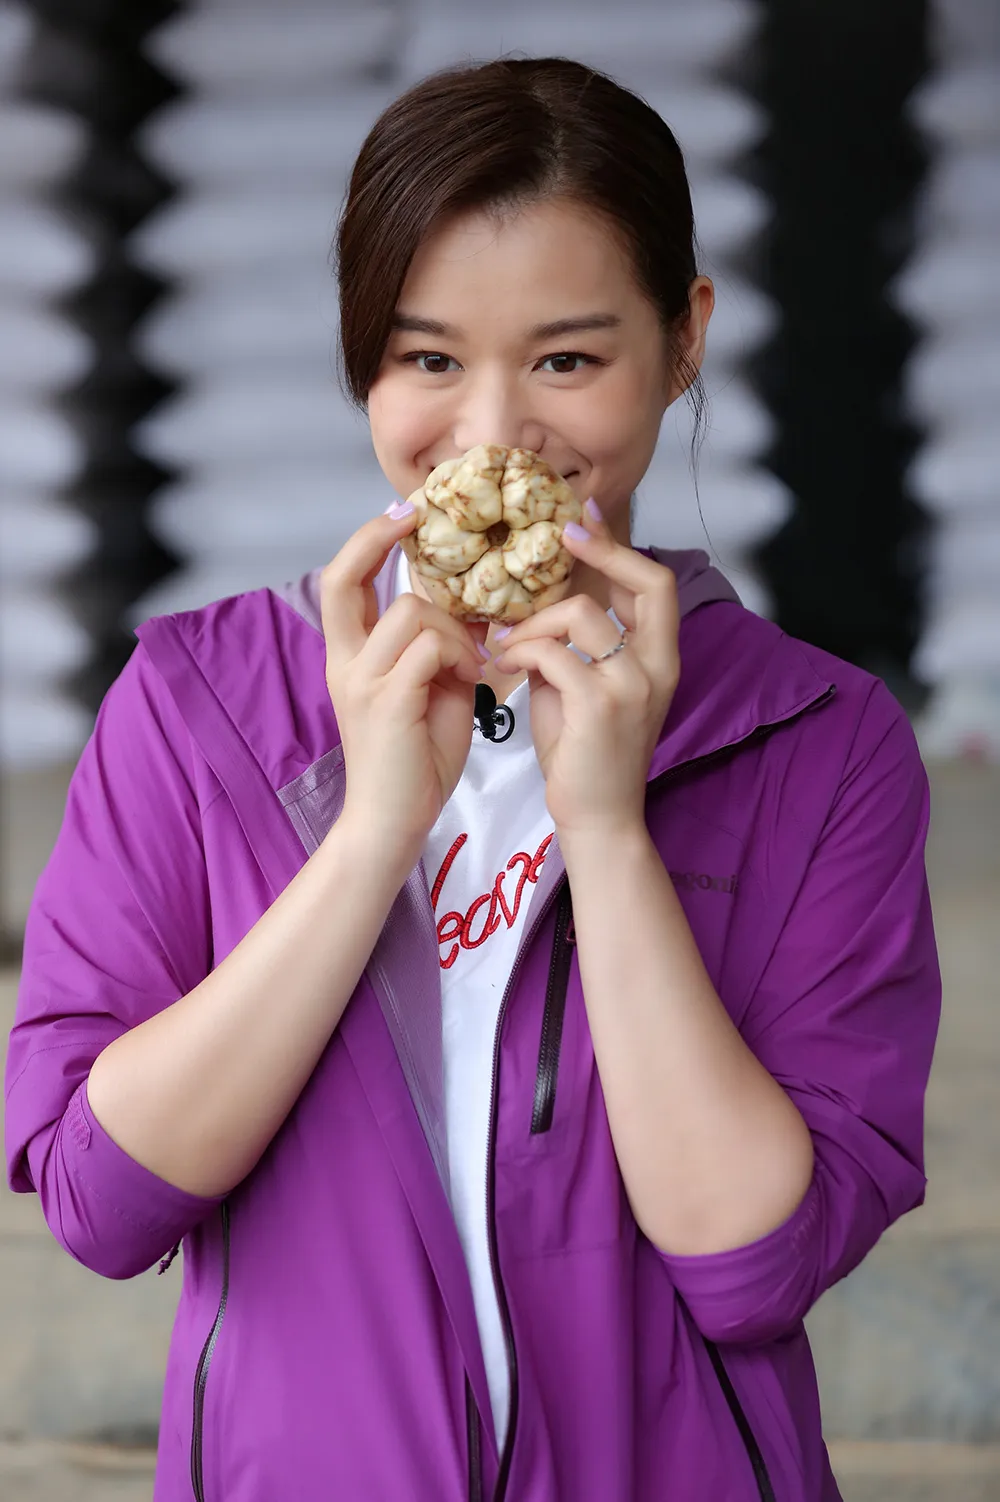 Myolie Wu enlists' micro aspirations' for left-behind children to help 'parents return' with industrial poverty alleviation